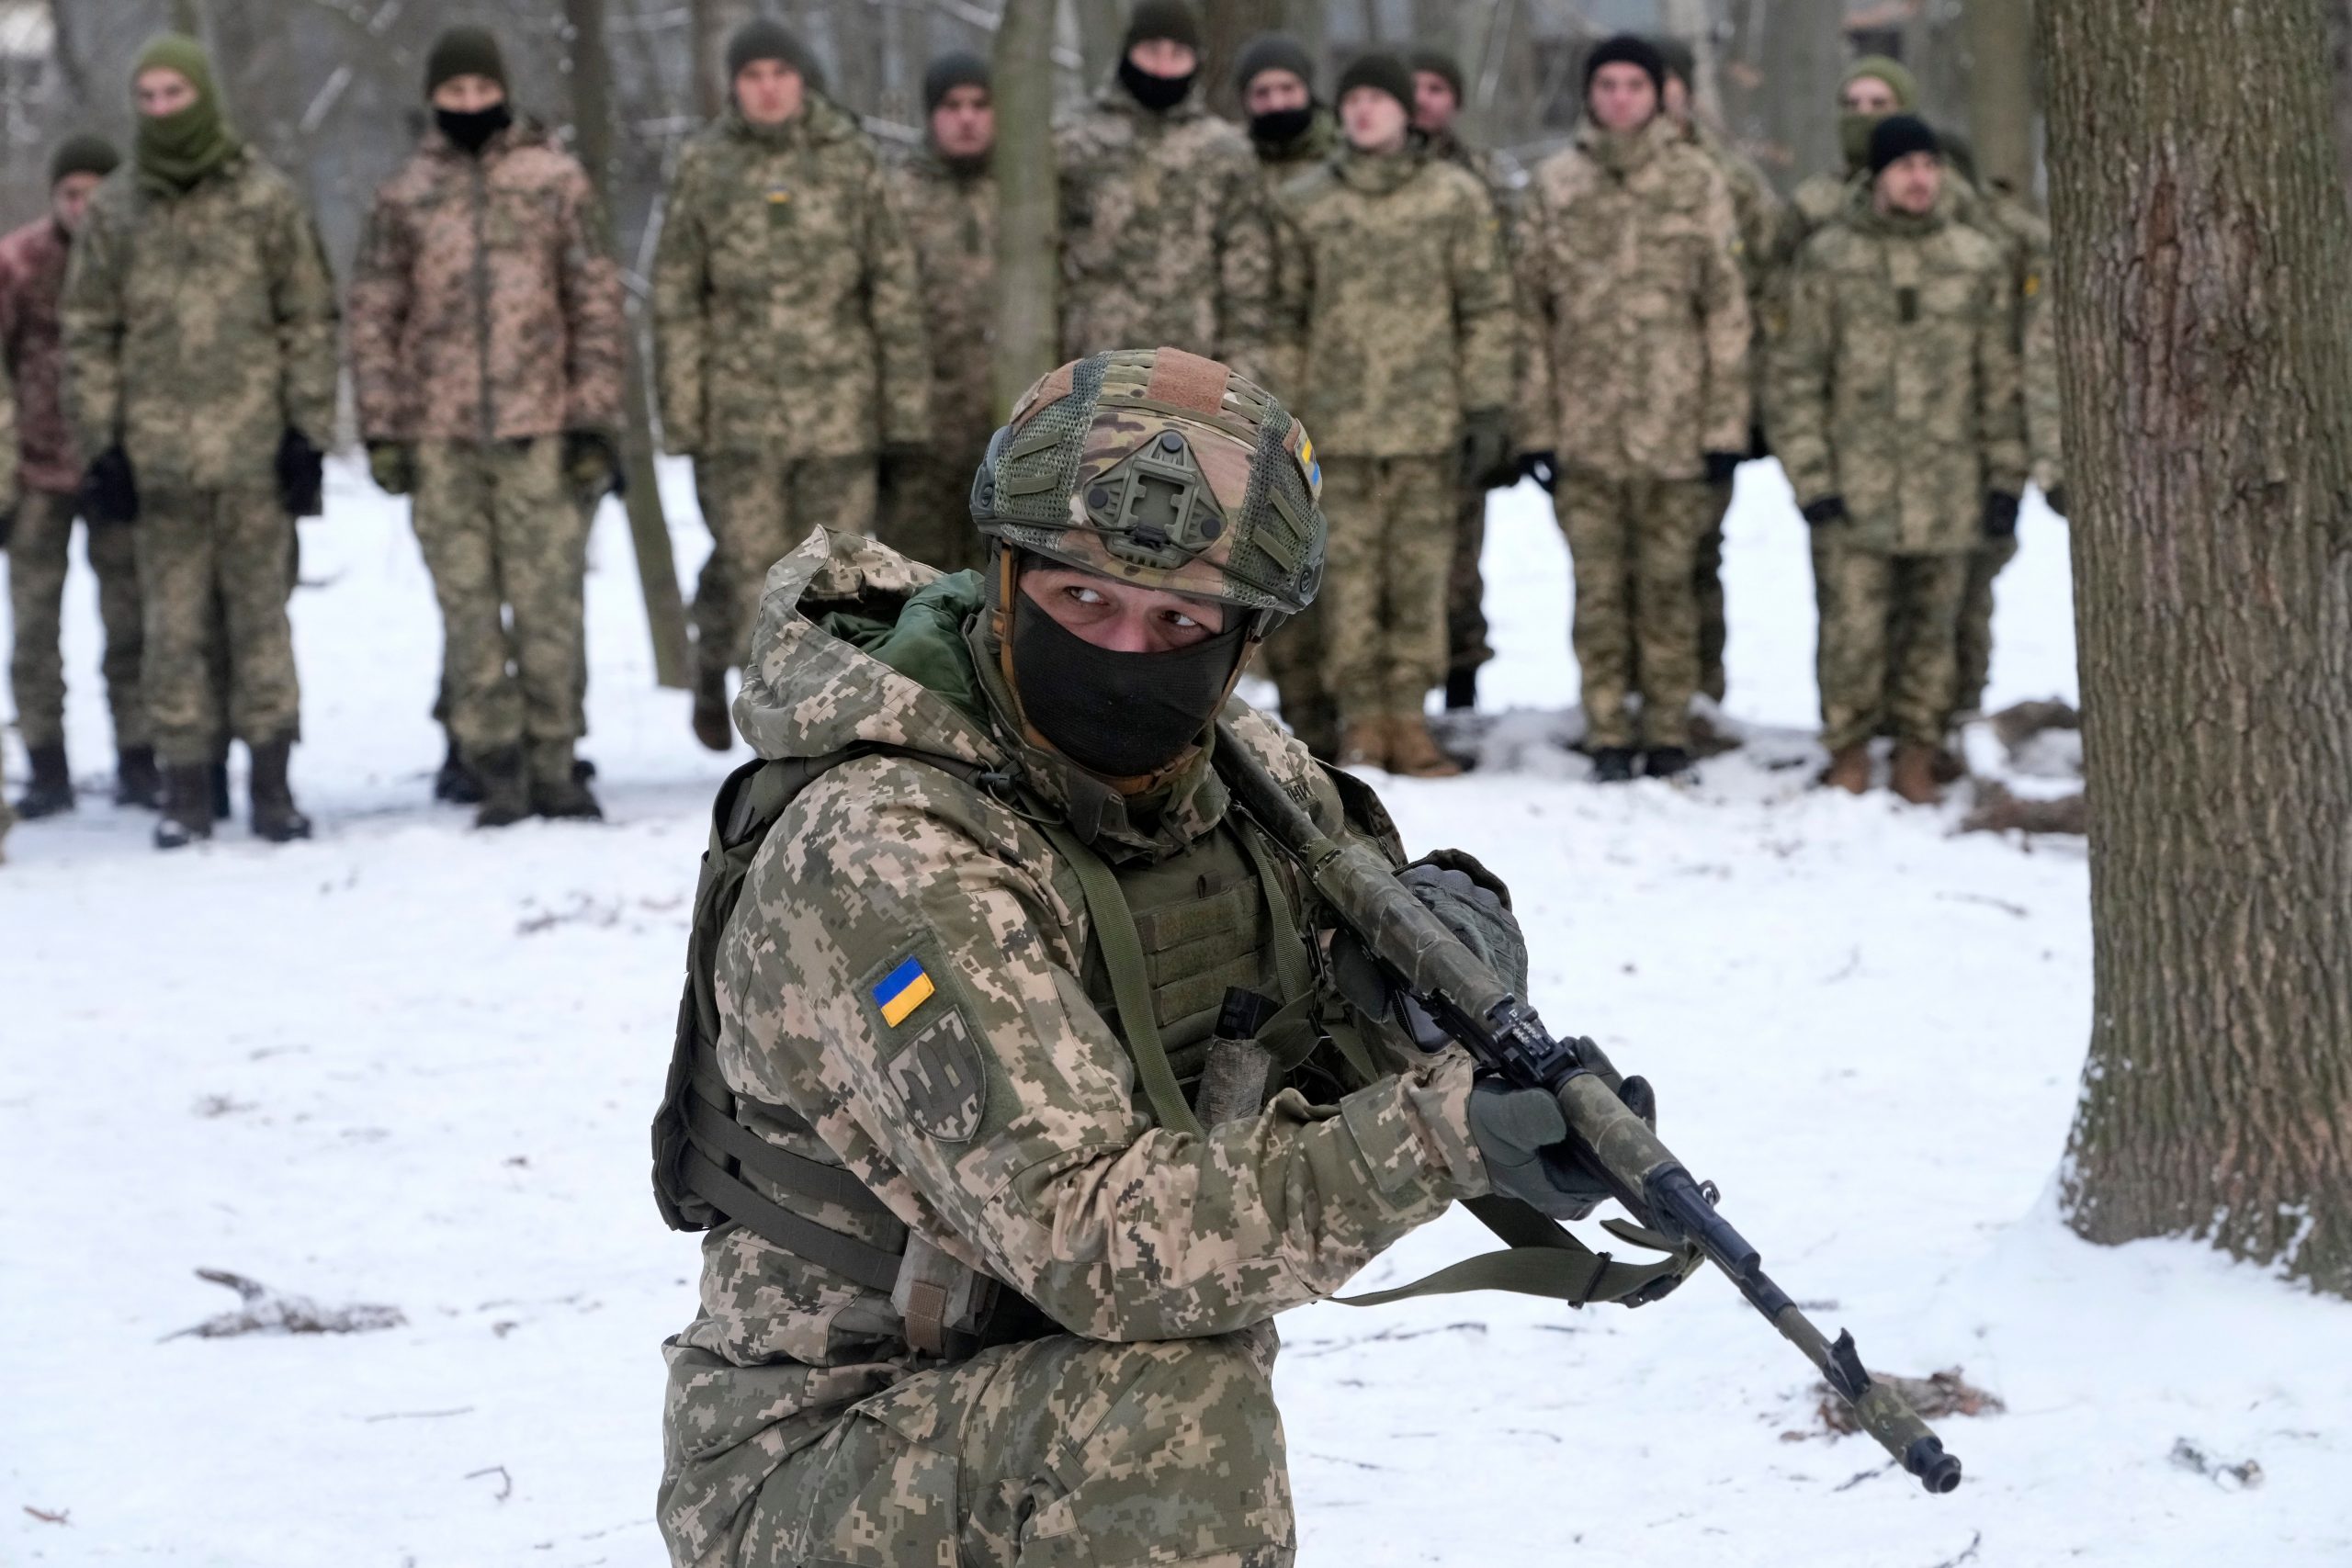 NATO bolsters support for Ukraine, as Russia threatens invasion